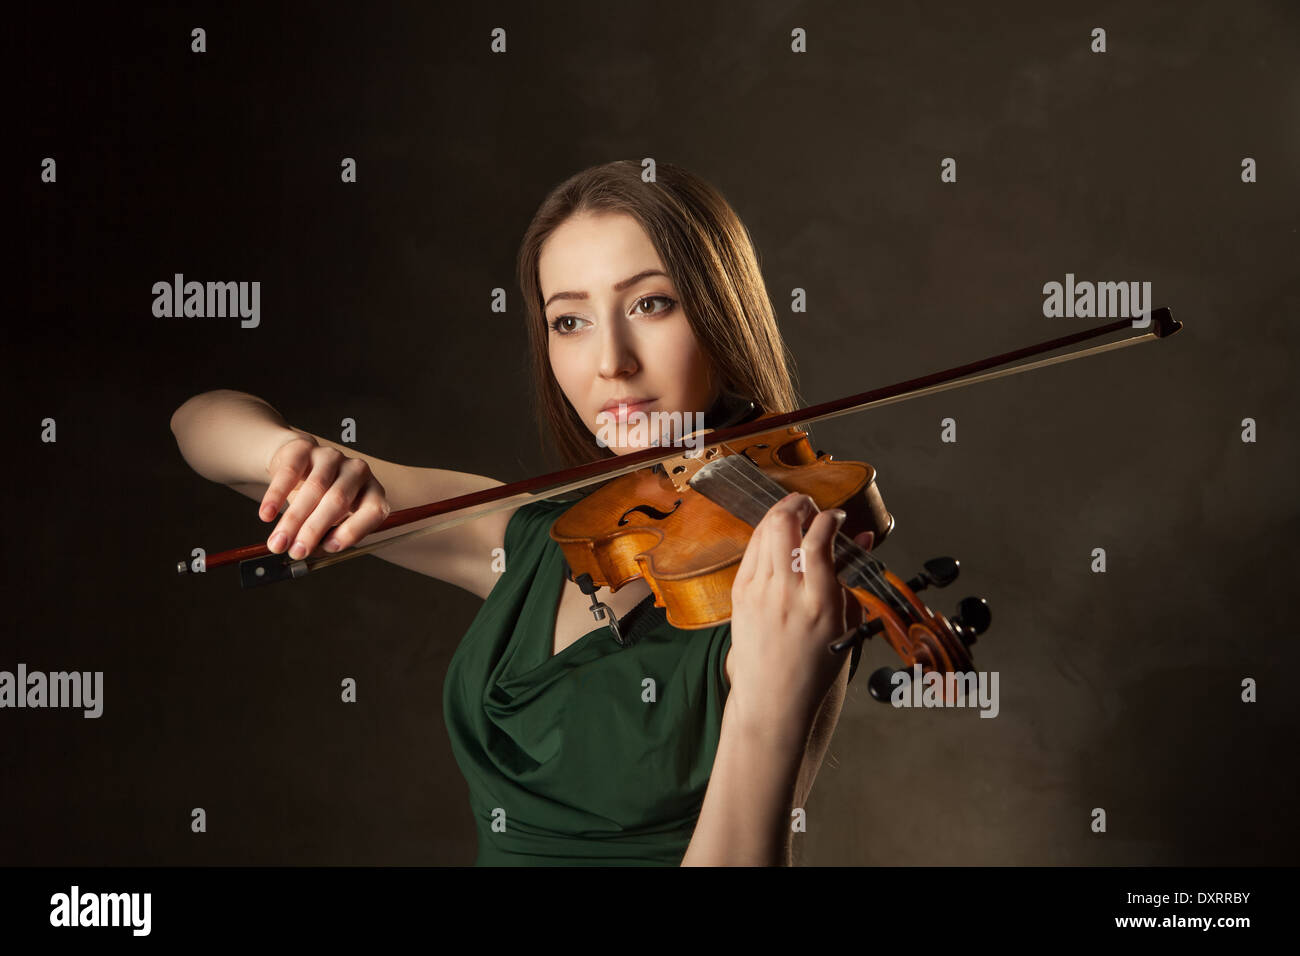 Beautiful young woman playing violin over black background Stock Photo